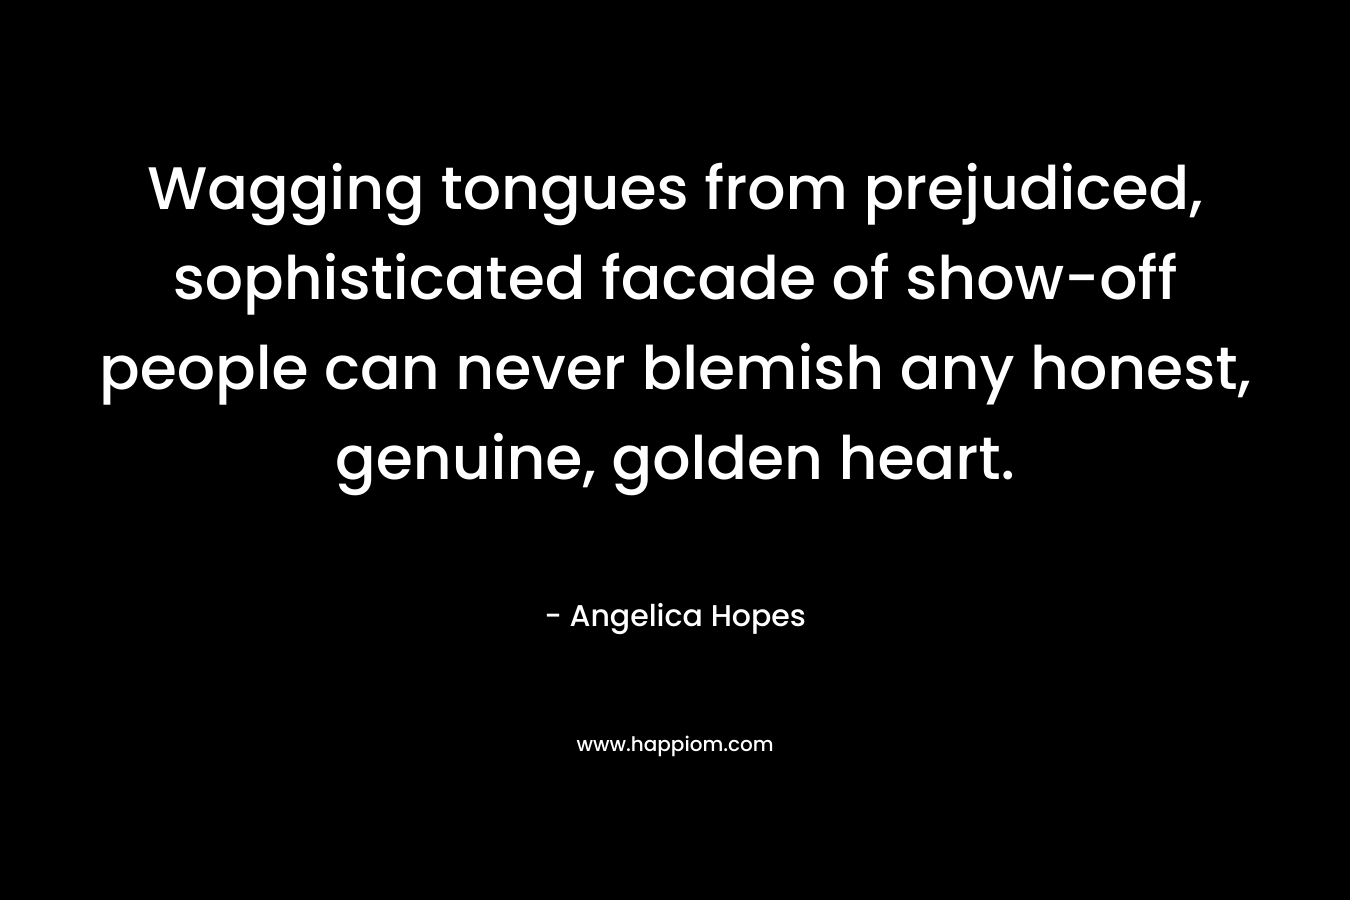 Wagging tongues from prejudiced, sophisticated facade of show-off people can never blemish any honest, genuine, golden heart.